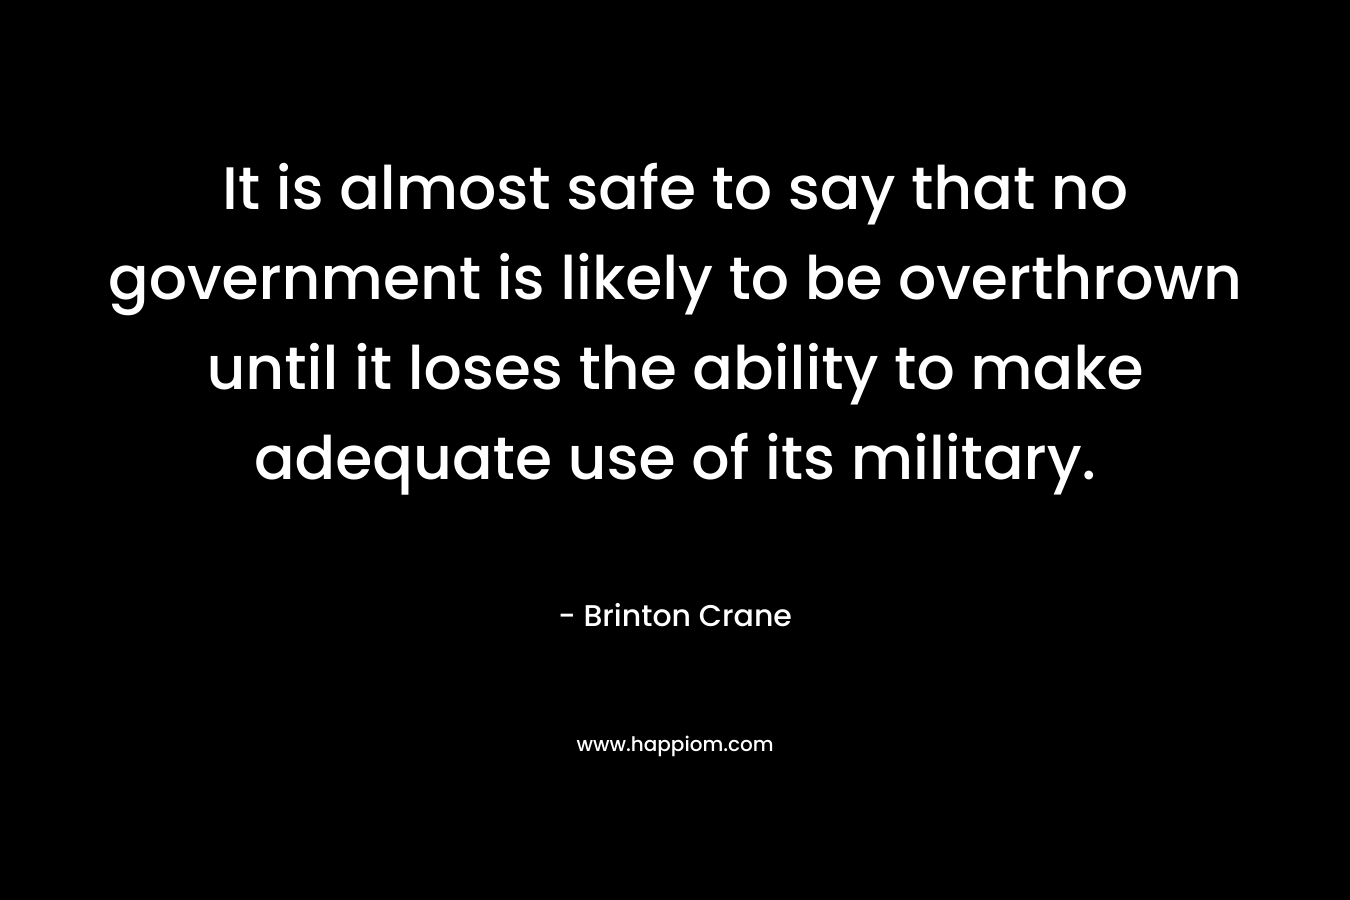 It is almost safe to say that no government is likely to be overthrown until it loses the ability to make adequate use of its military.